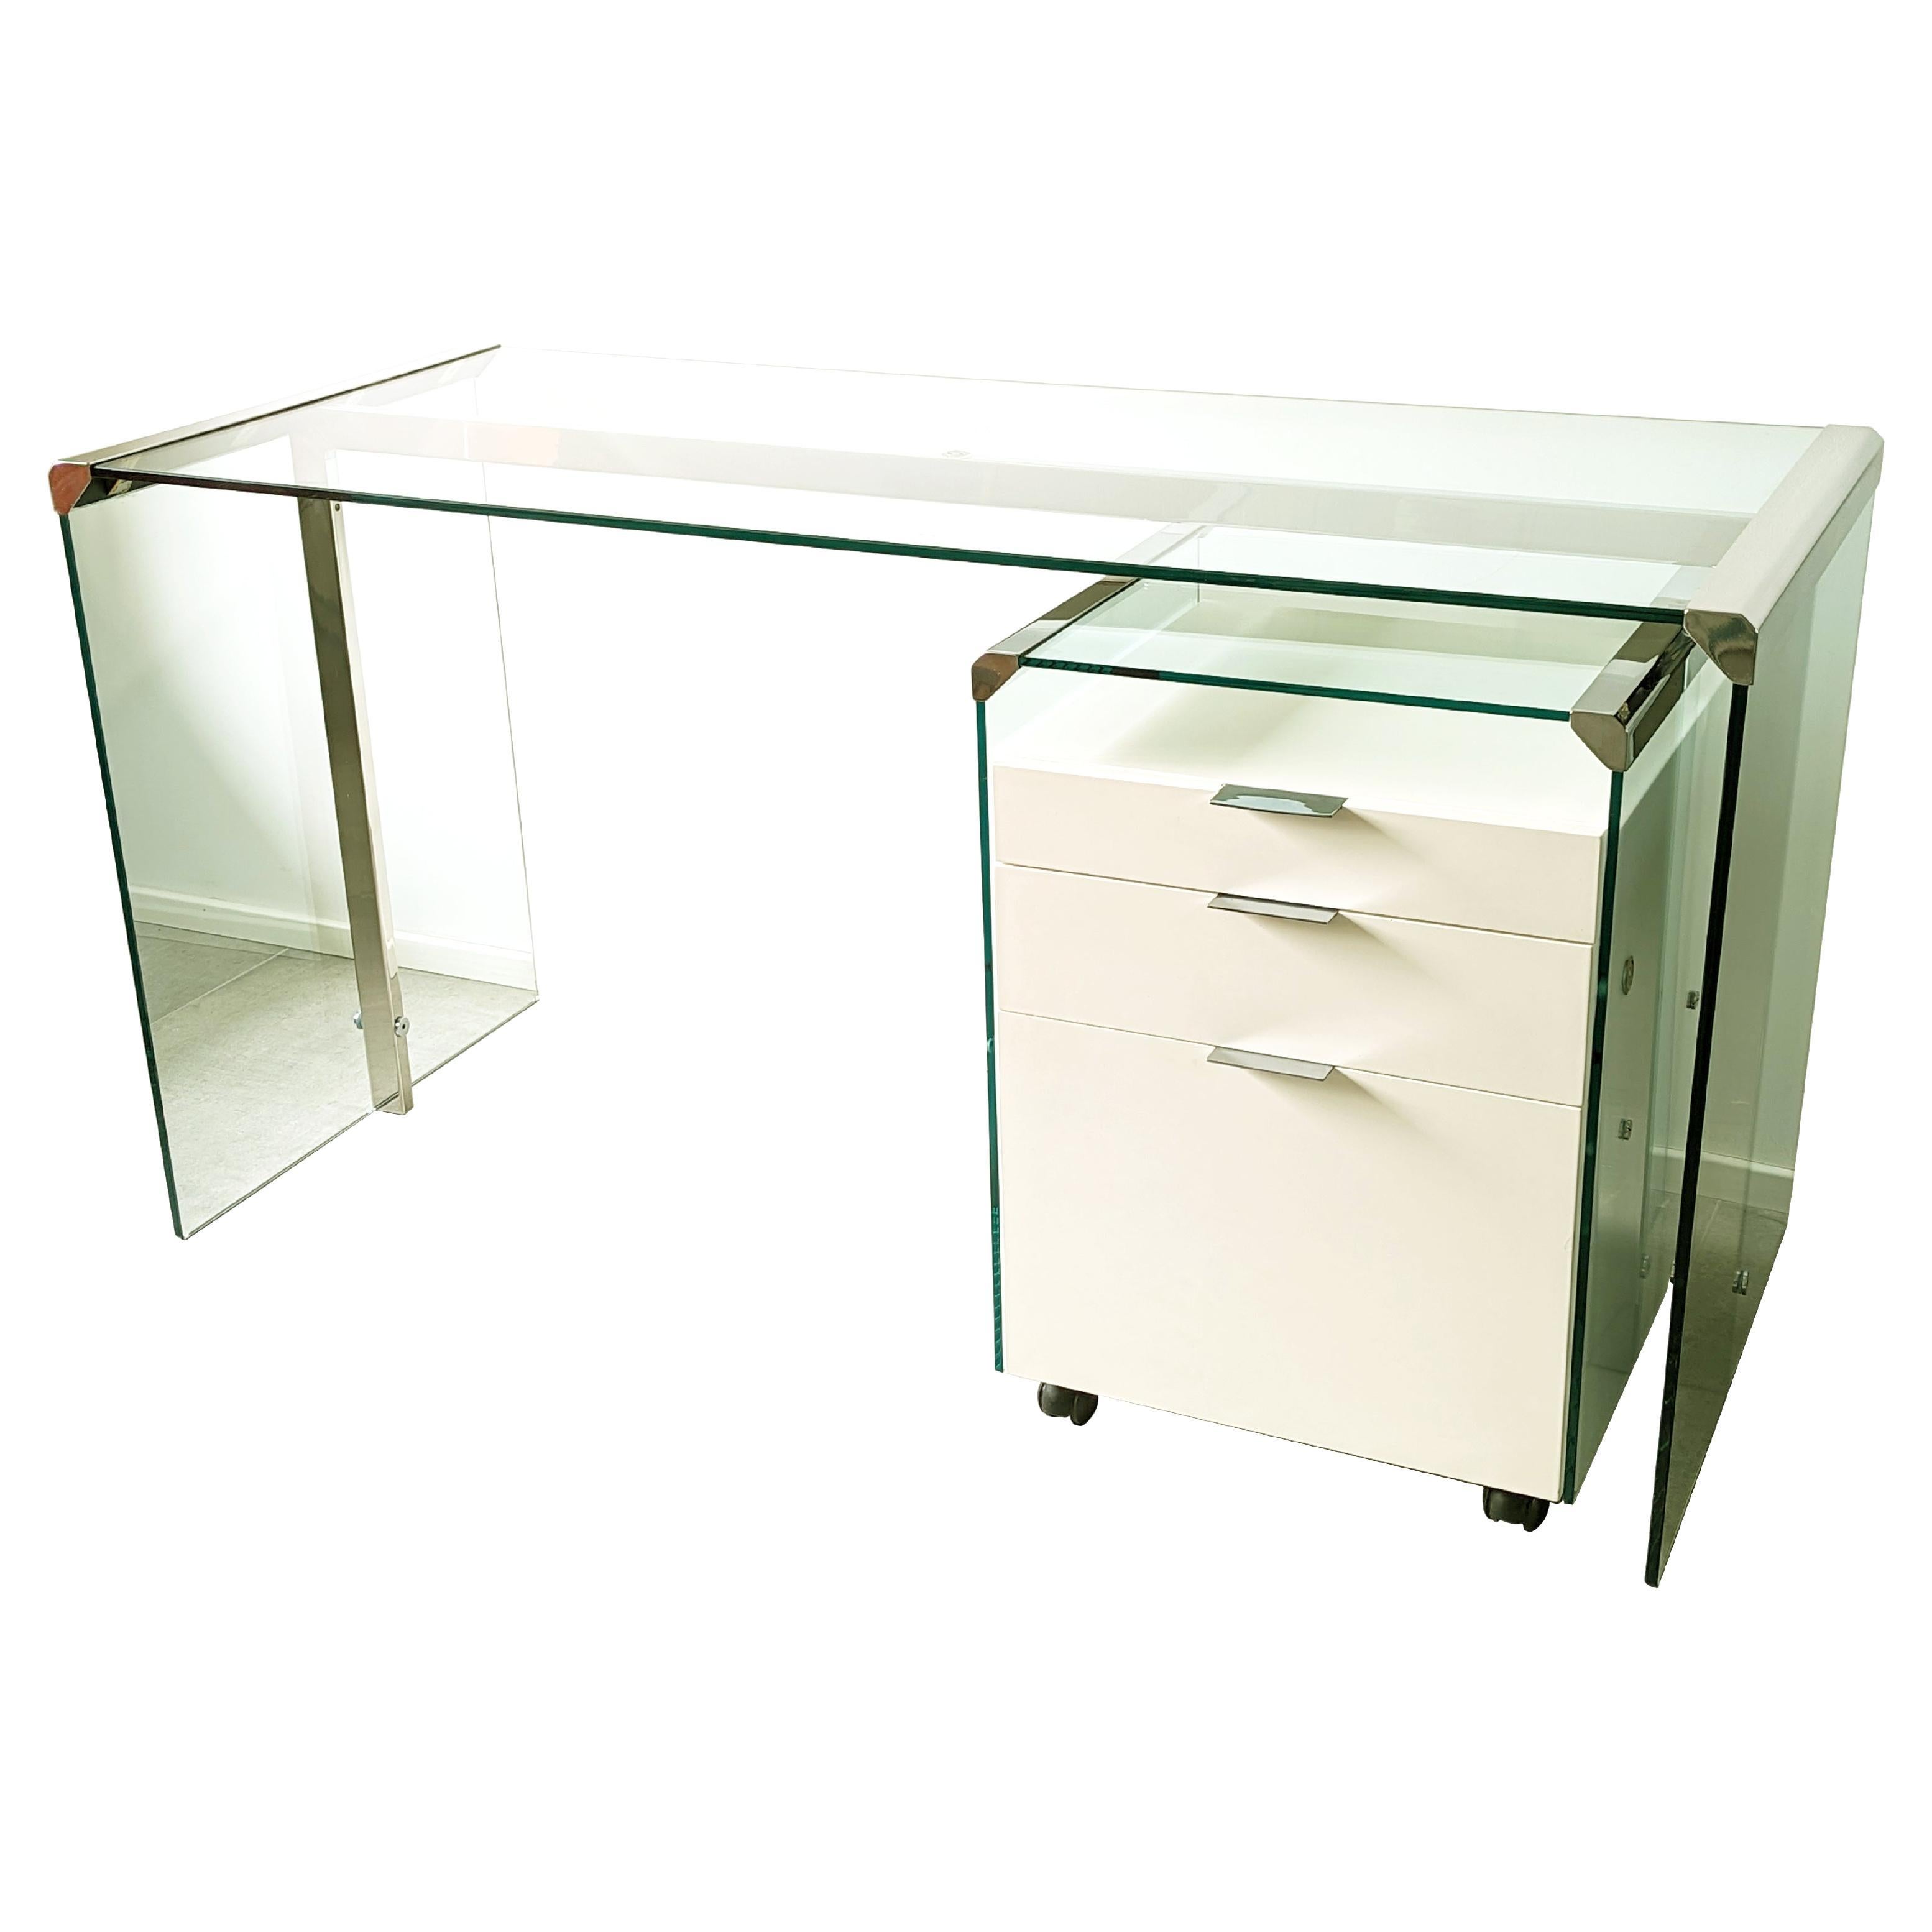 Glass, Painted wood & Chrome Plated Metal 1990s desk by Gallotti e Radice